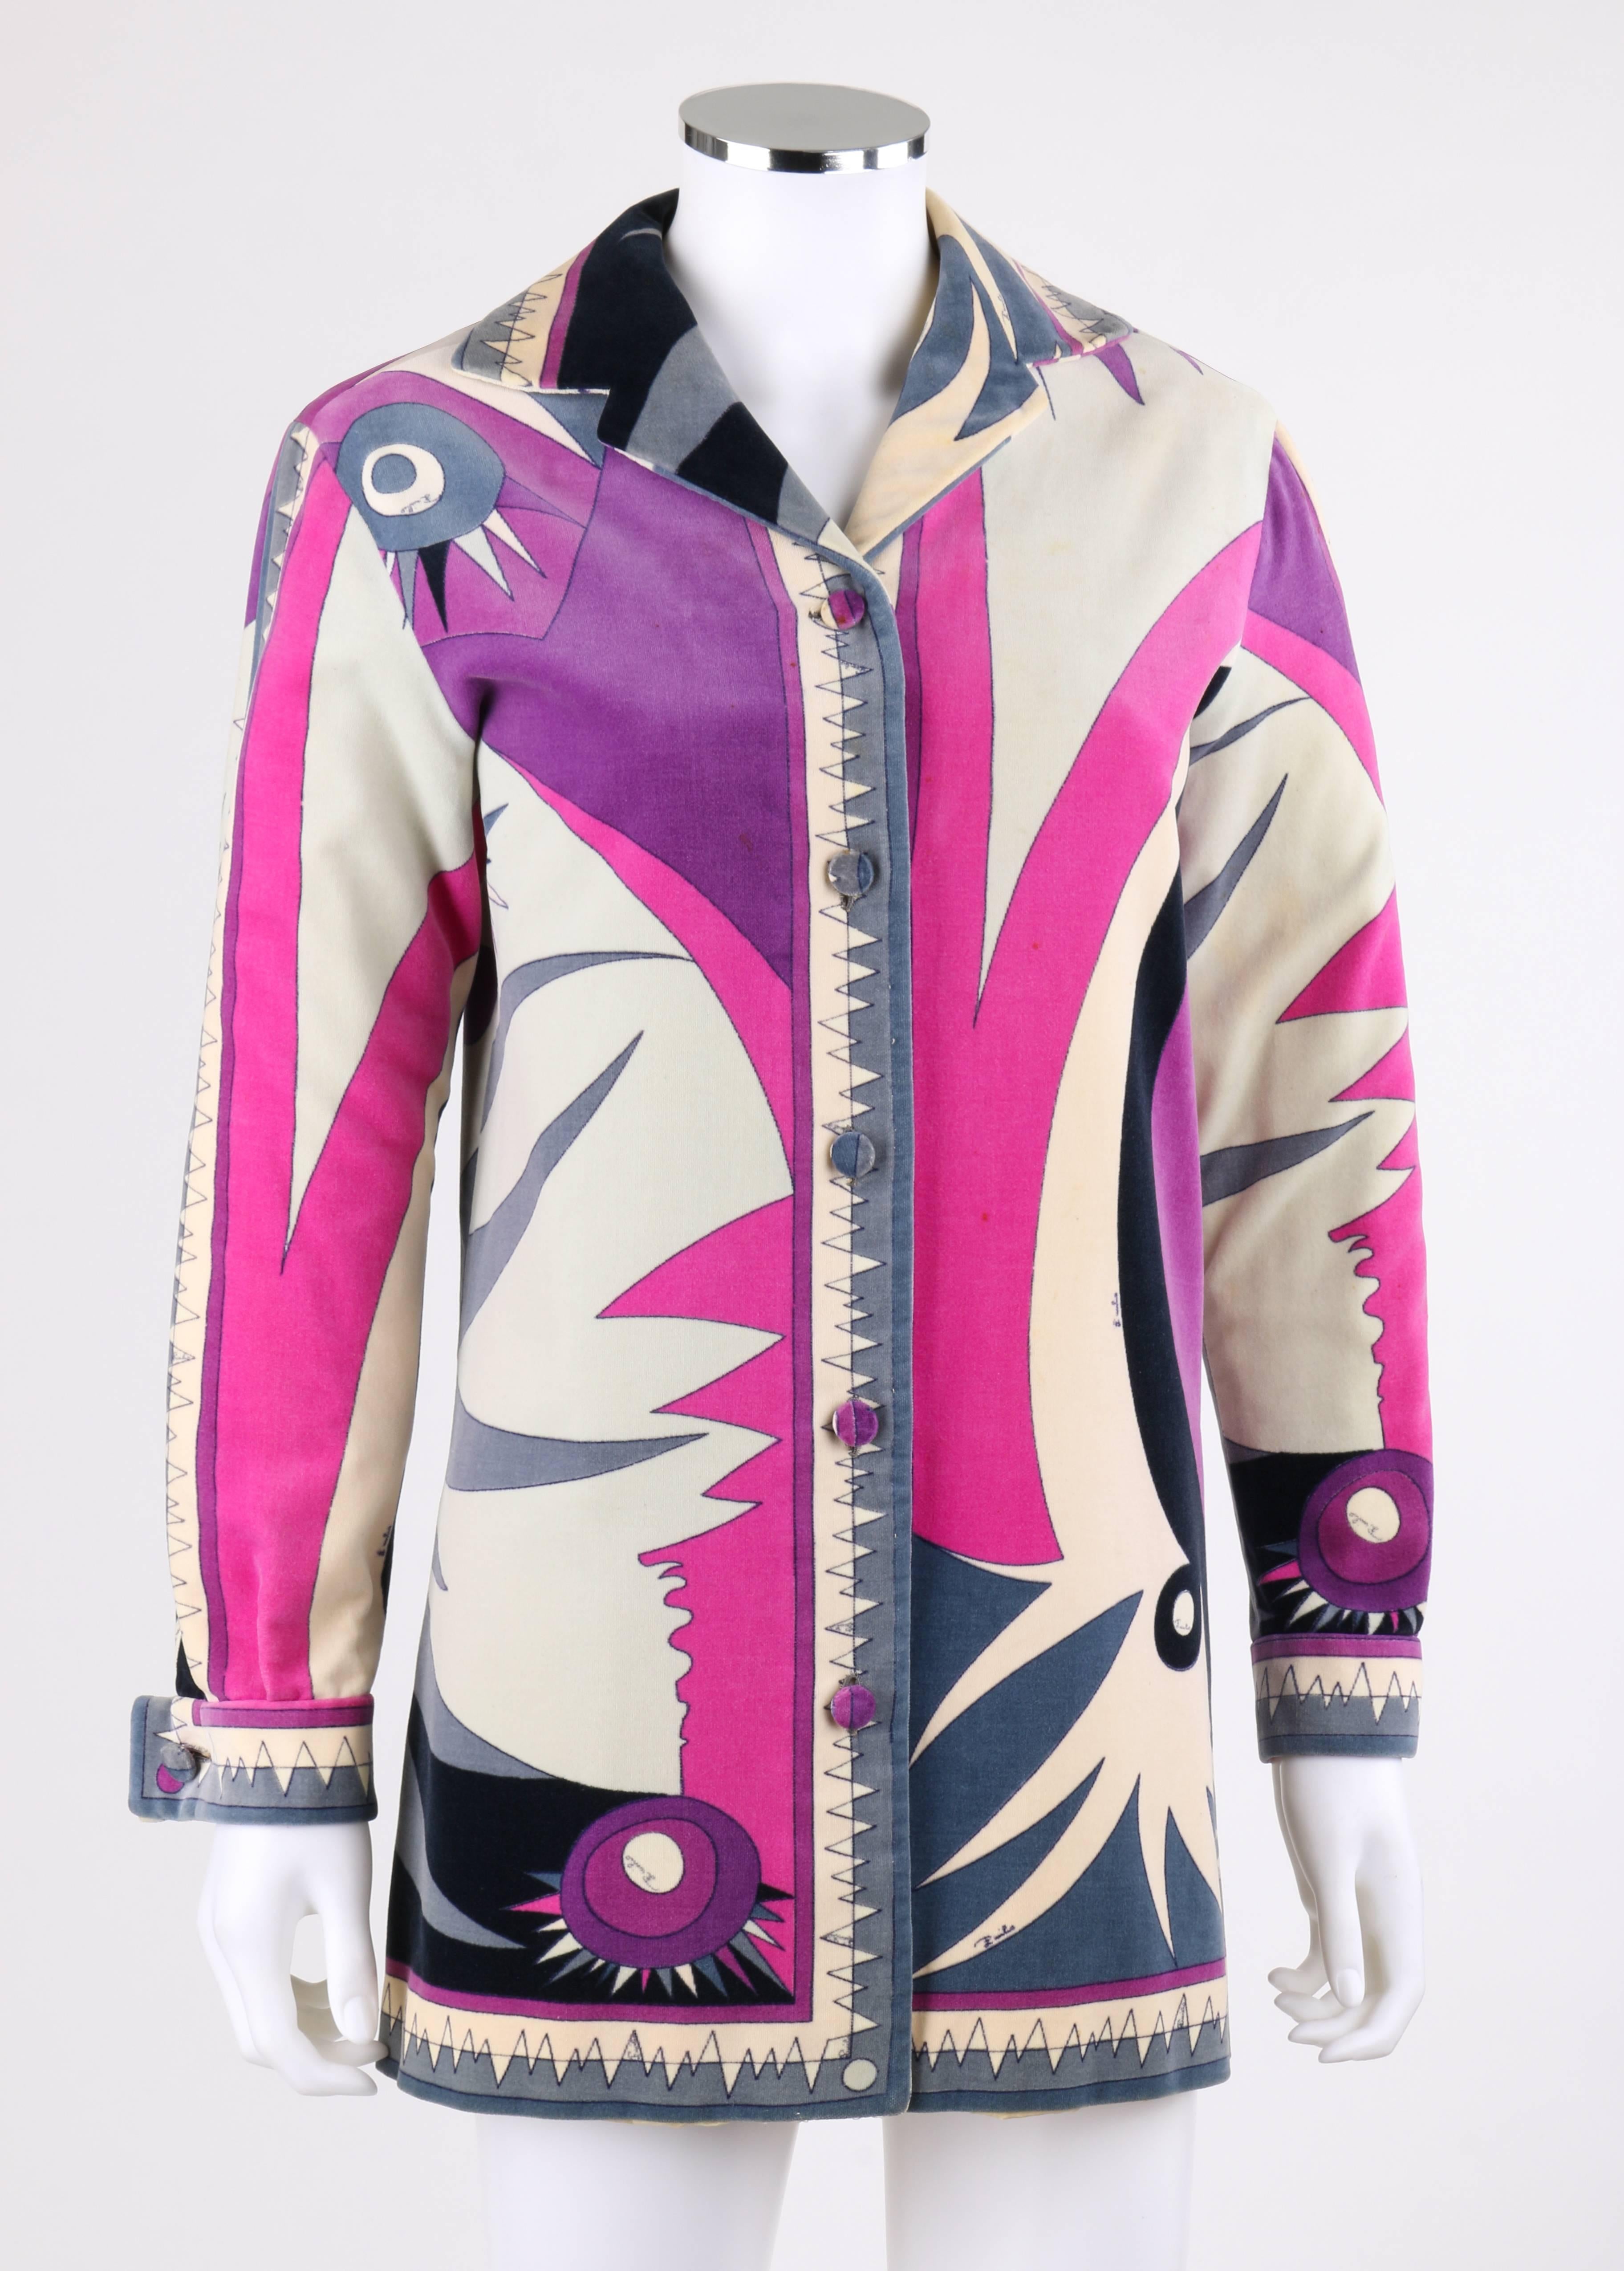 Vintage Emilio Pucci c.1960's cotton velvet jacket with multi color abstract sunburst and wave signature print in shades of purple, fuchsia, gray, and cream. Notched lapel collar. Five center front covered button closures. Long sleeves with french